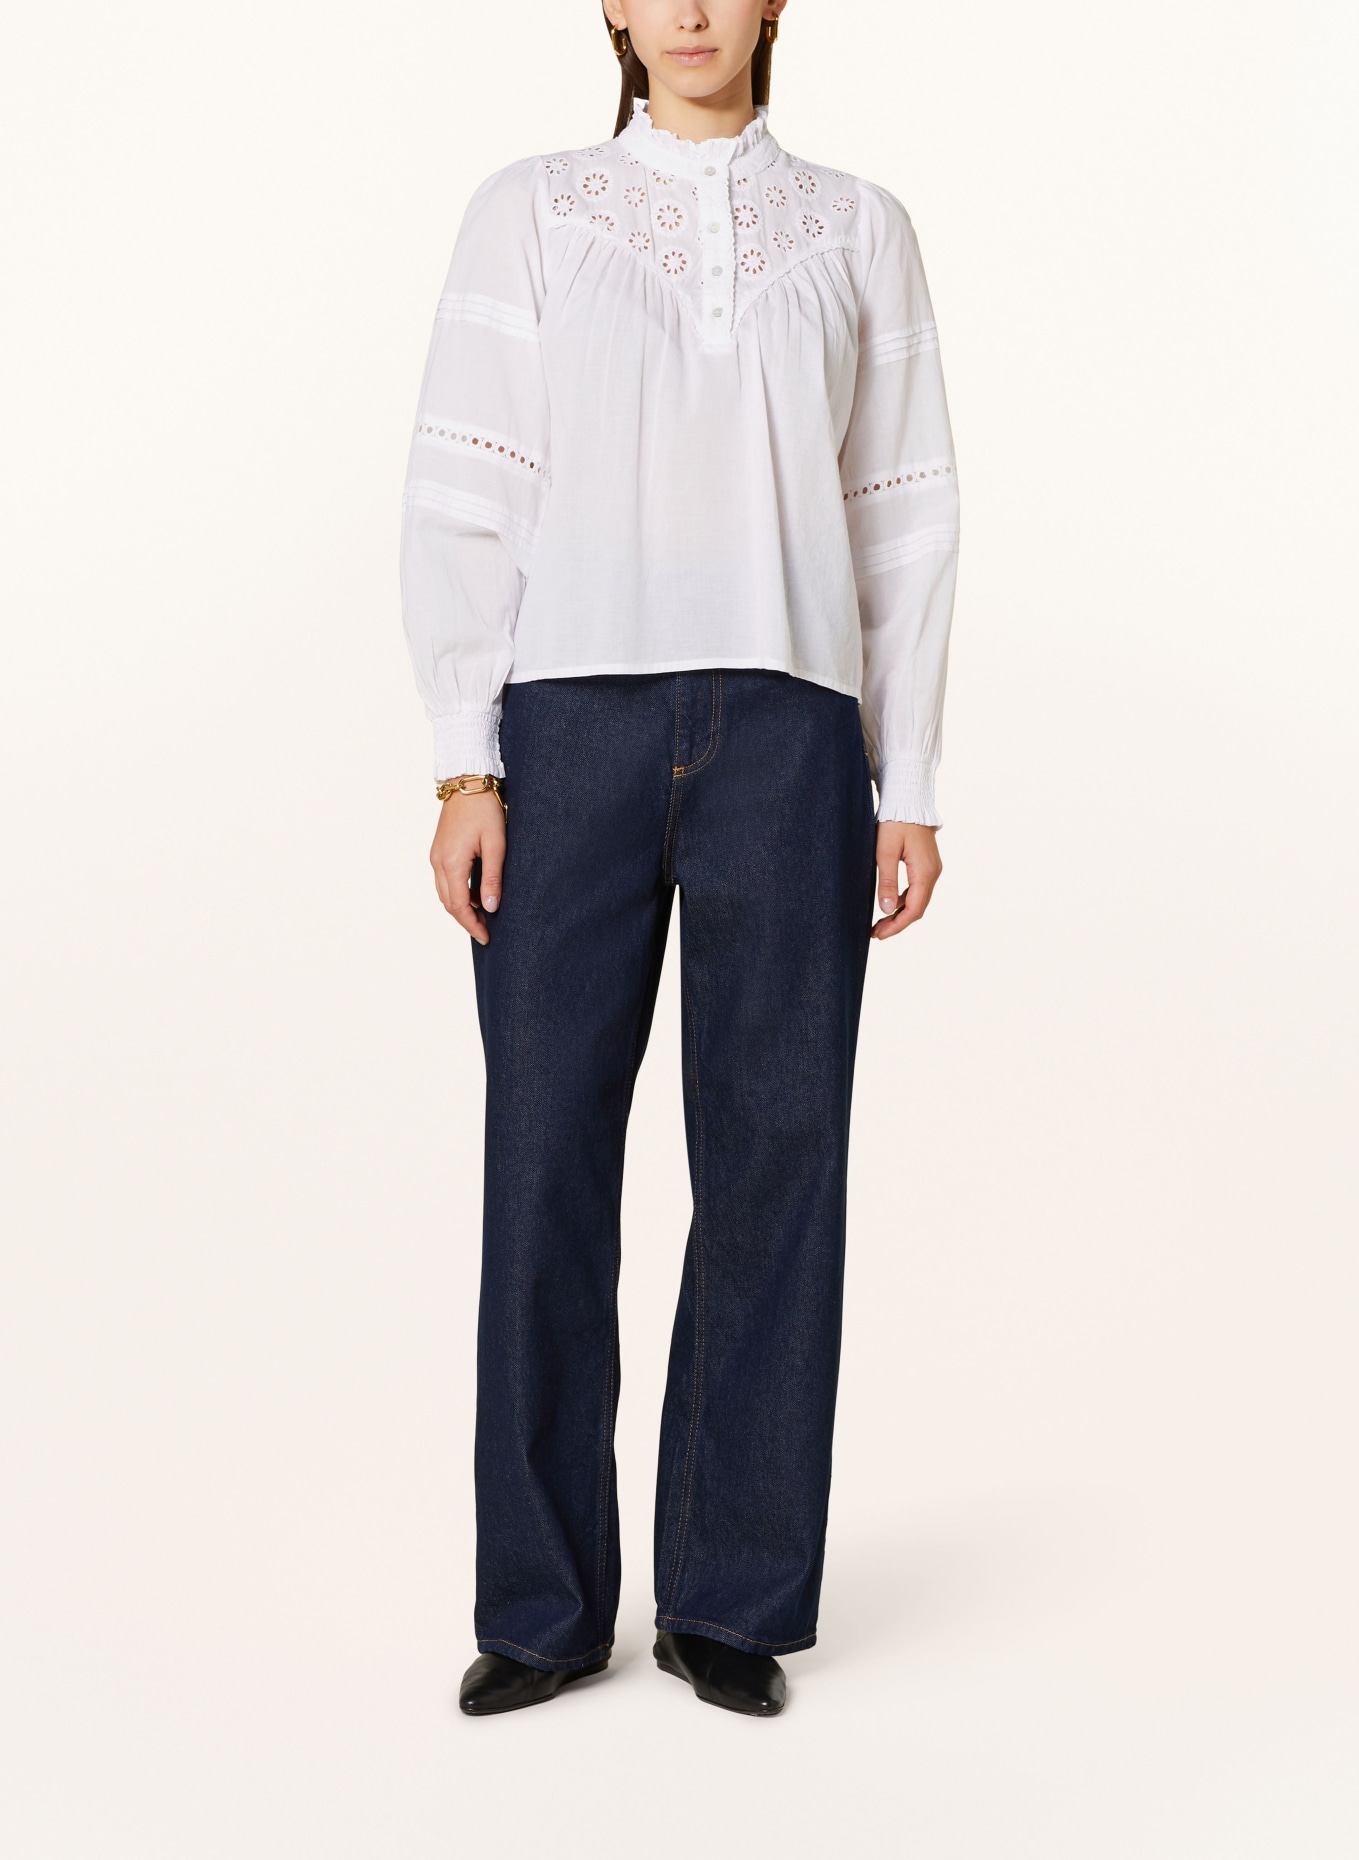 NEO NOIR Shirt blouse EMILY with broderie anglaise, Color: WHITE (Image 2)